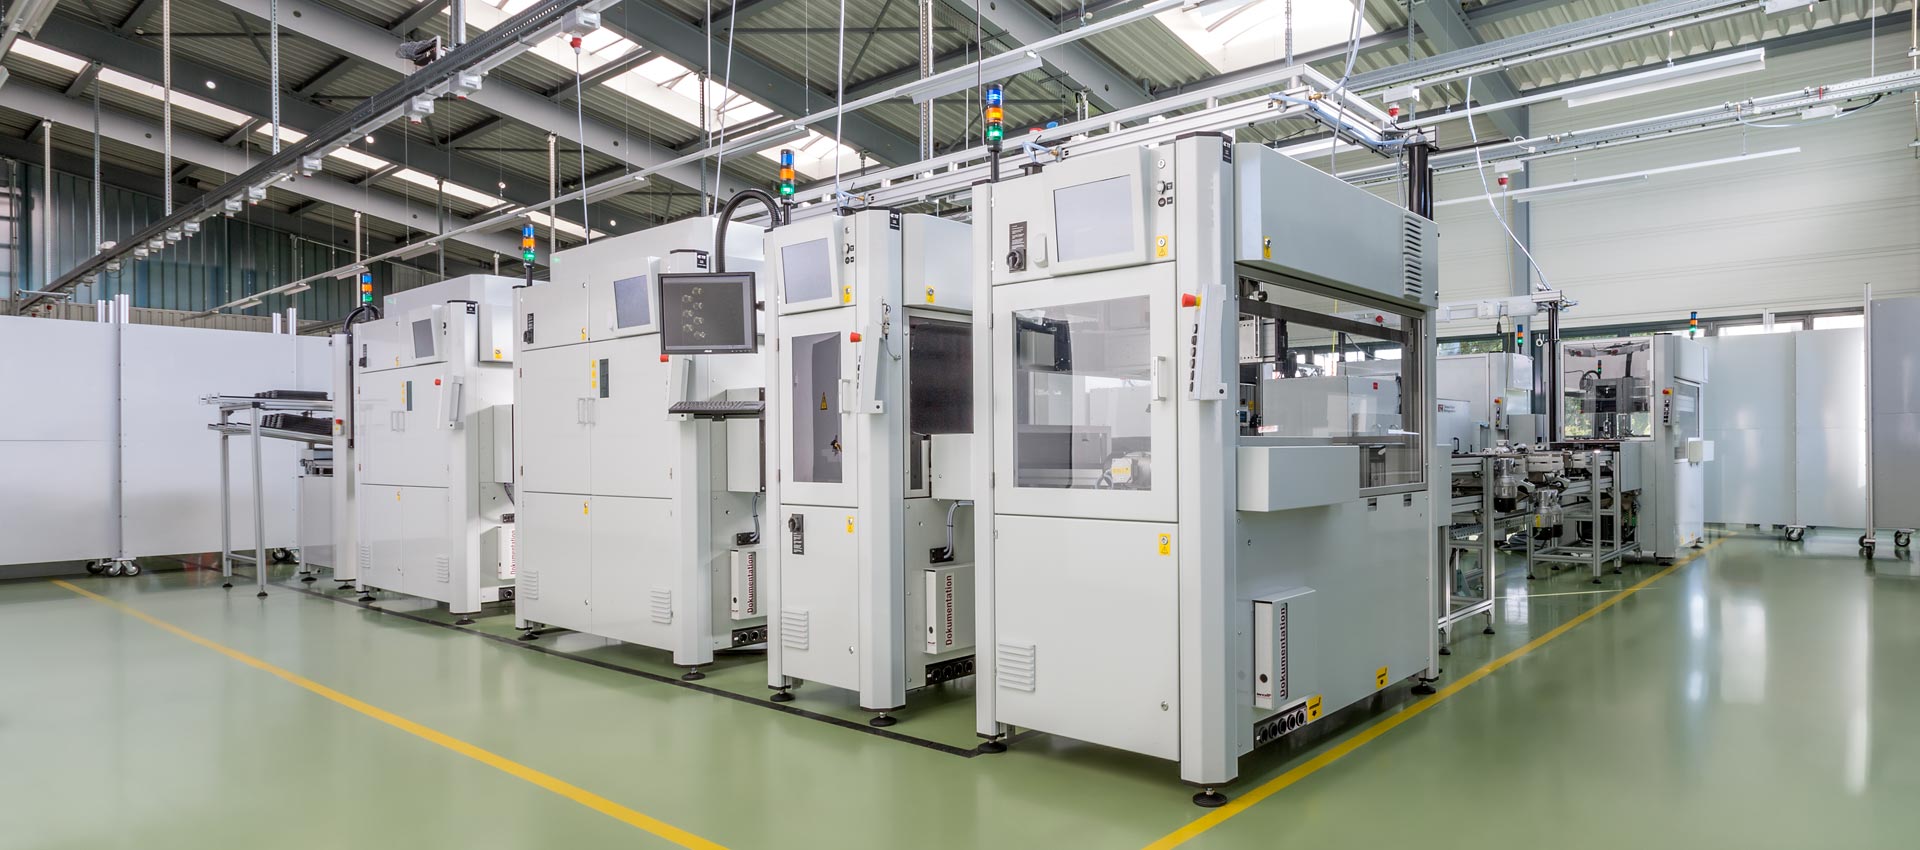 Semi-automatic assembly line for sensor units with in-line casting. The following processes are integrated: Caulking, laser soldering, casting, laser welding, leak testing. Cycle time < 12 seconds.